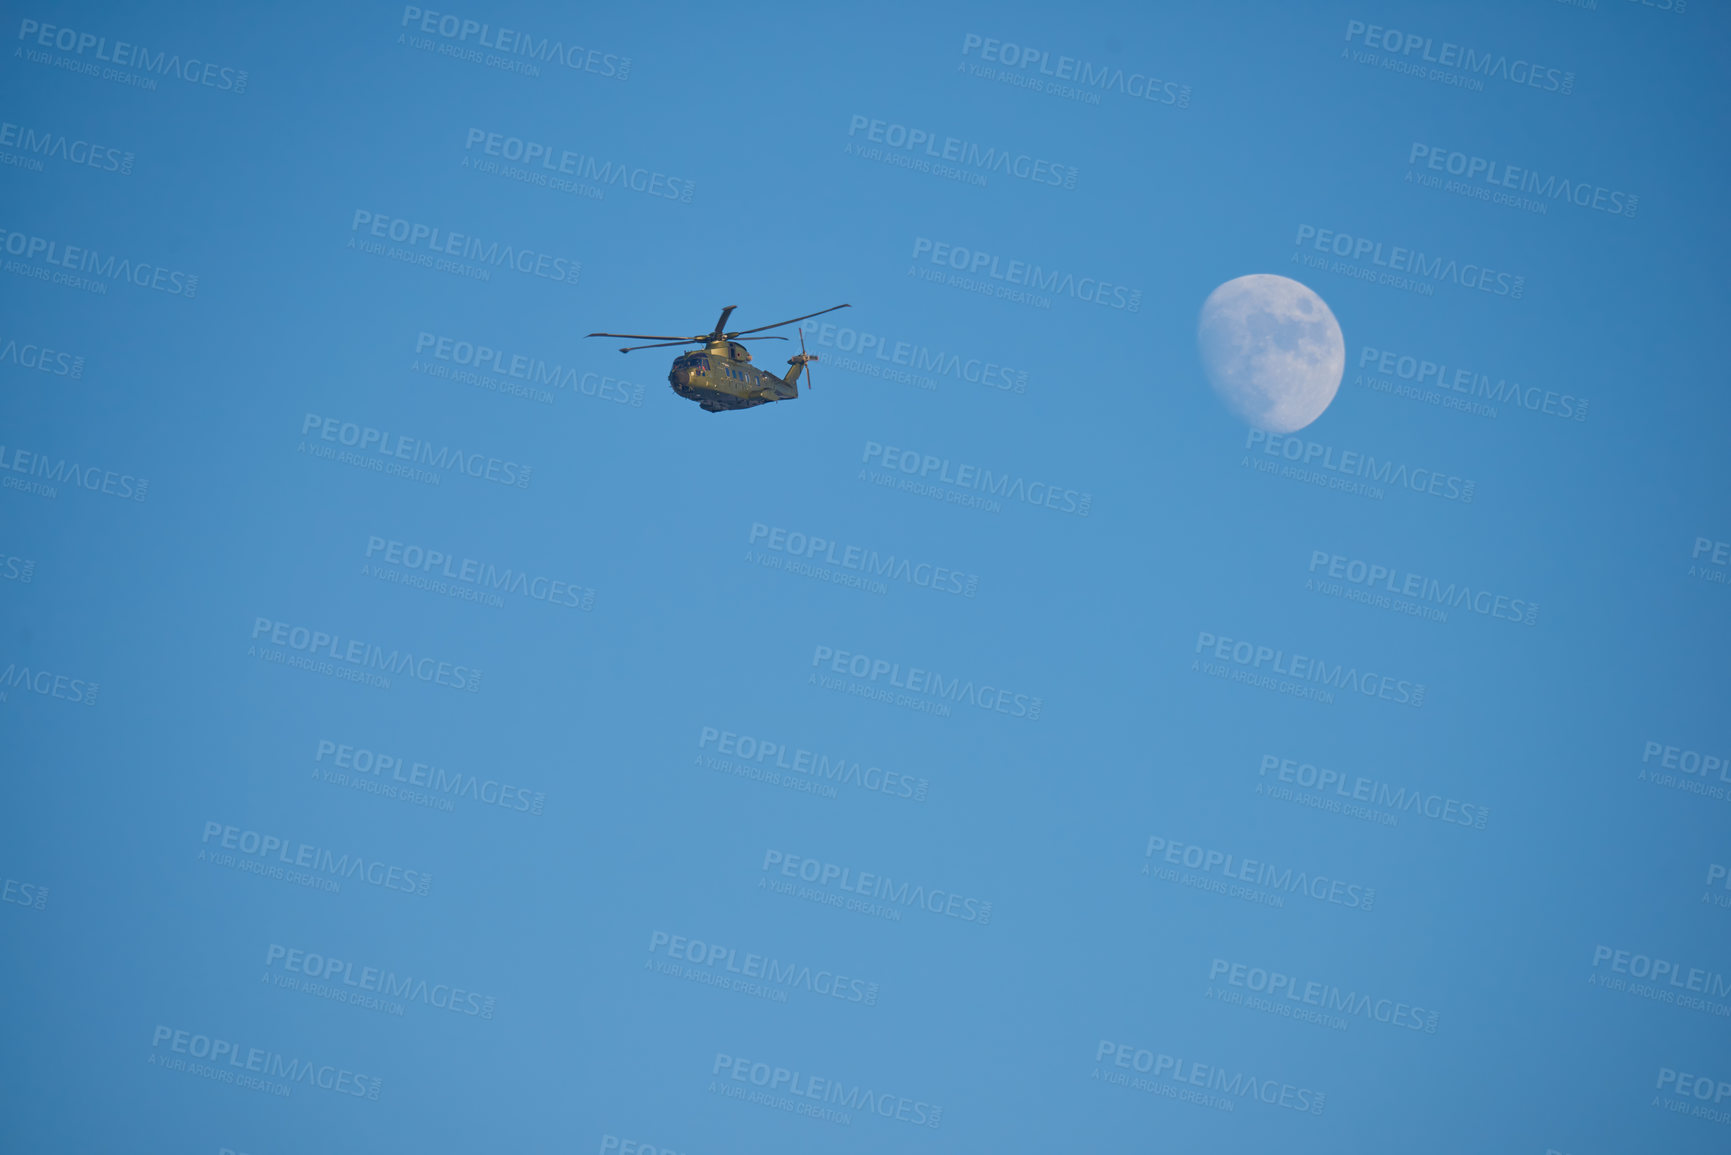 Buy stock photo Helicopter and blue sky
